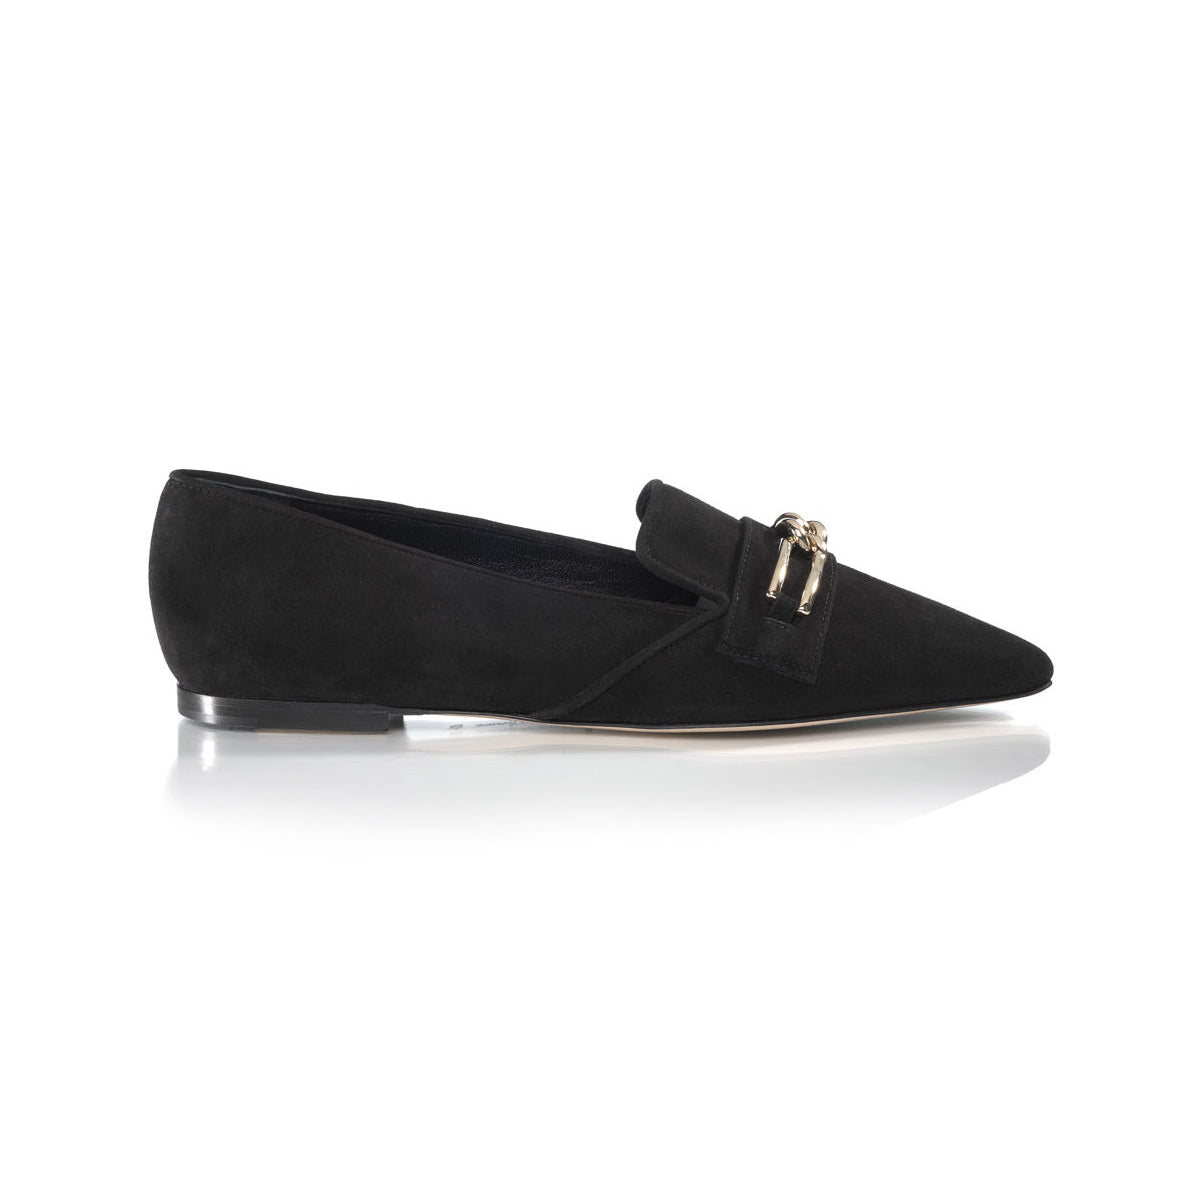 Chase Suede Loafer in Black & Gold